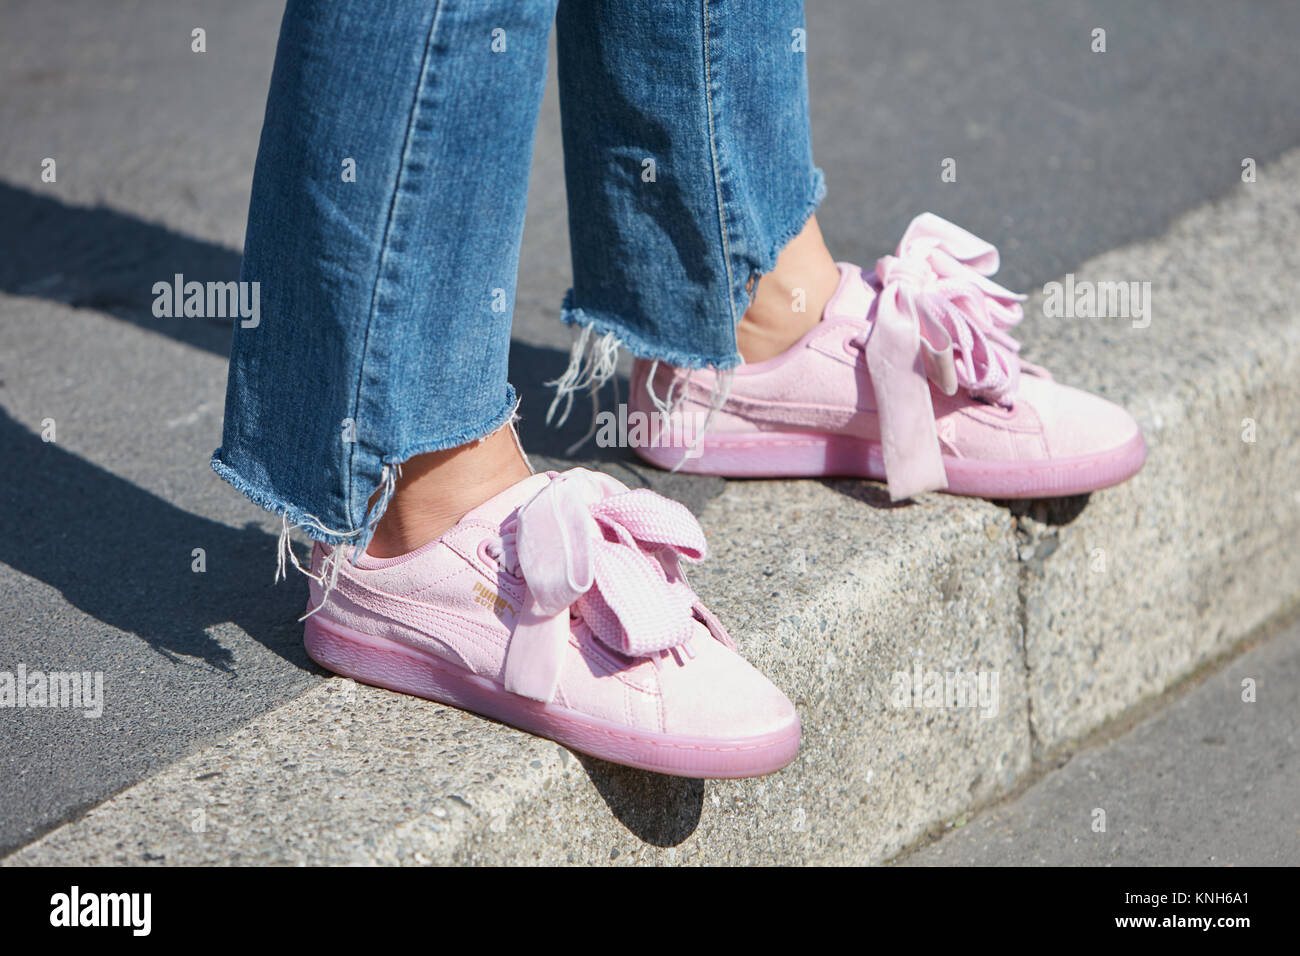 MILAN - SEPTEMBER 24: Woman with Puma suede pink shoes and torn blue jeans  trousers before Trussardi fashion show, Milan Fashion Week street style on  Stock Photo - Alamy